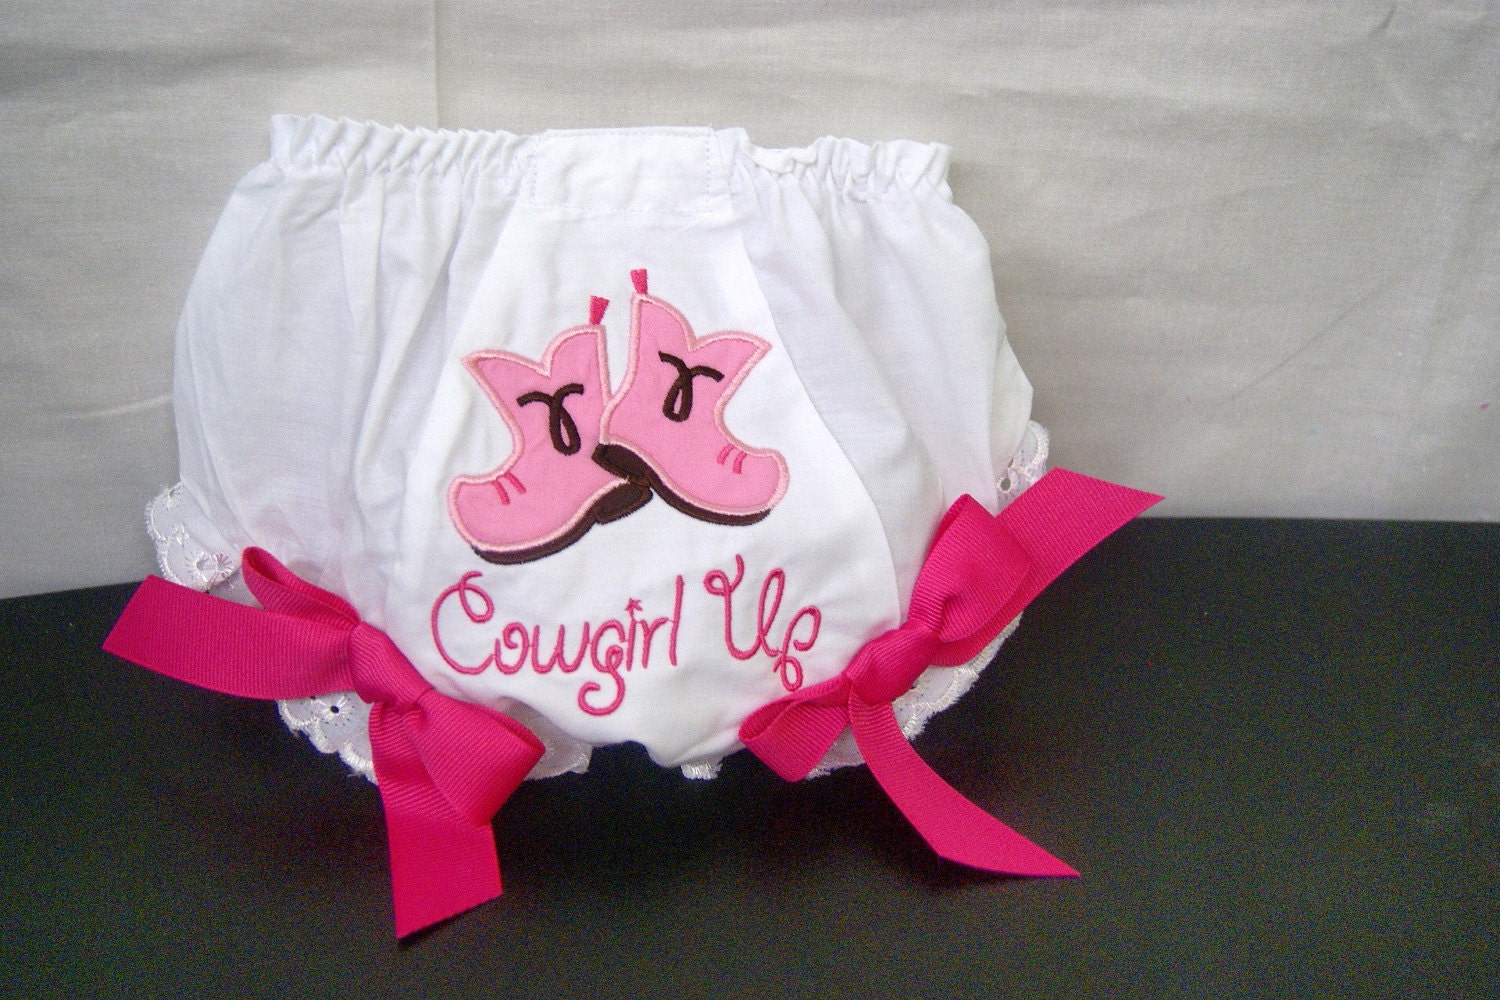 White bloomers are embellished with applique cowgirl boots and has saying